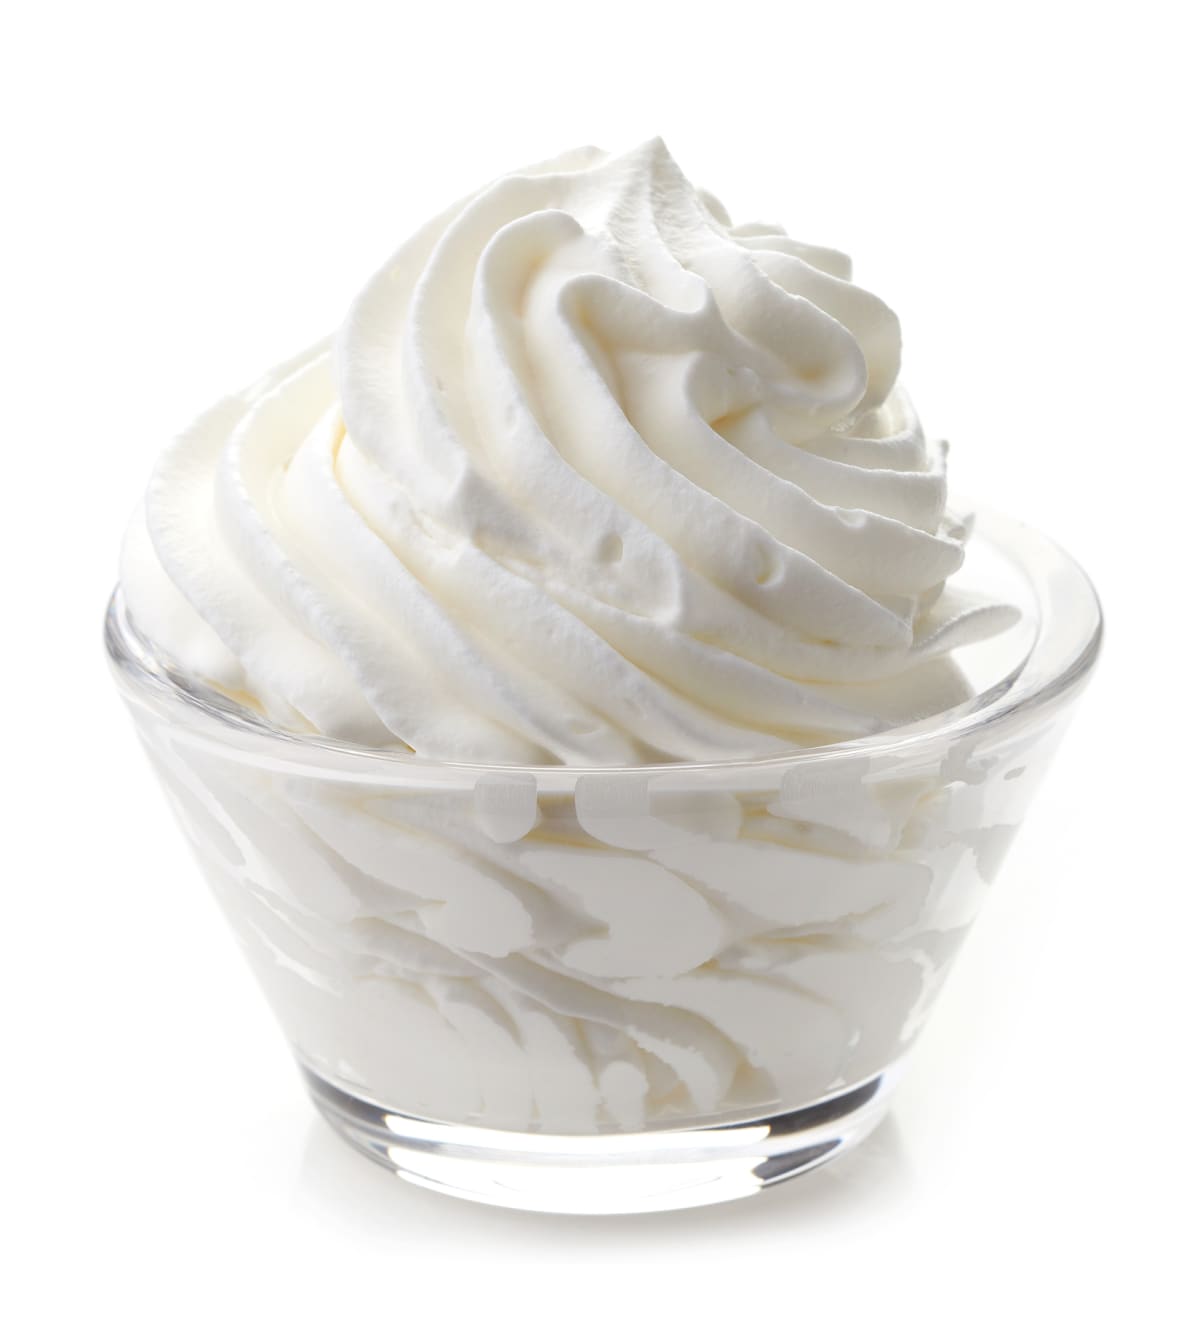 Glass bowl of whipped cream isolated on a white background